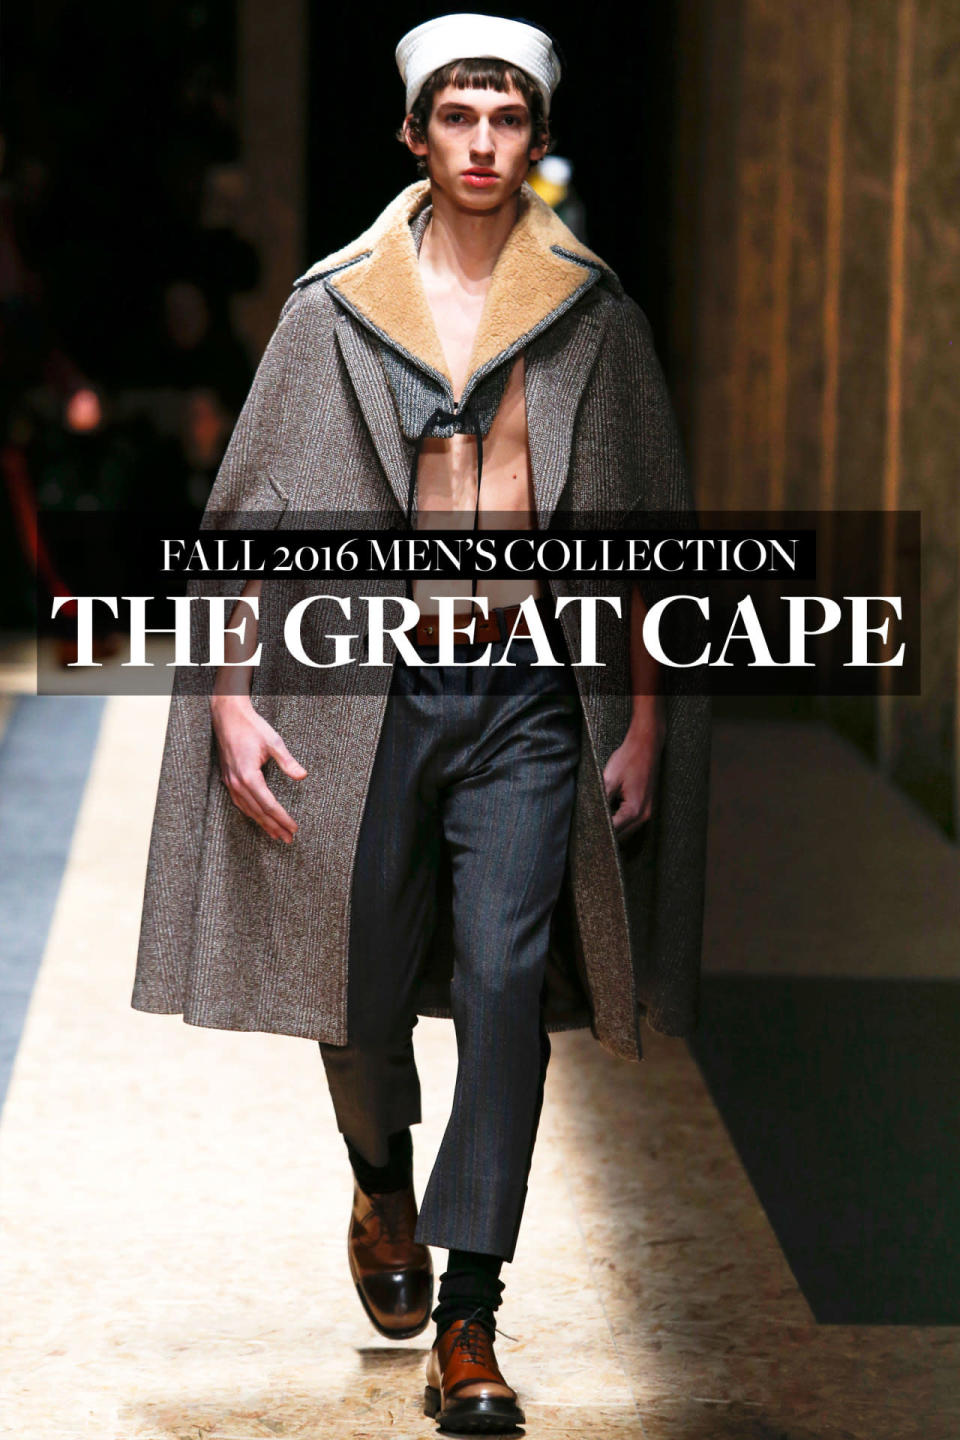 The Great Cape